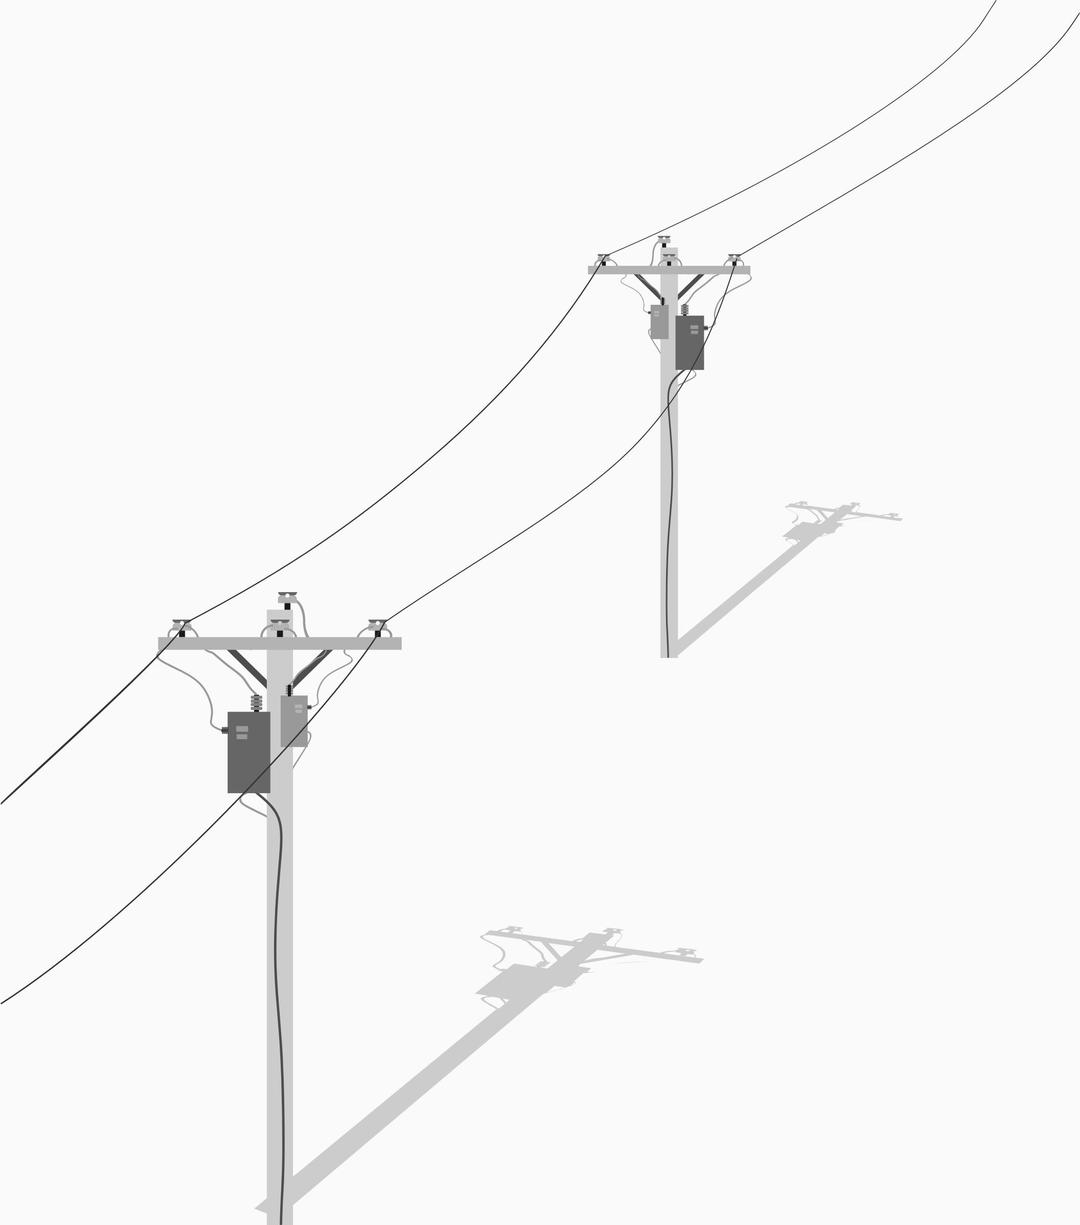 Two Telephone - Utility Poles With Wires png transparent